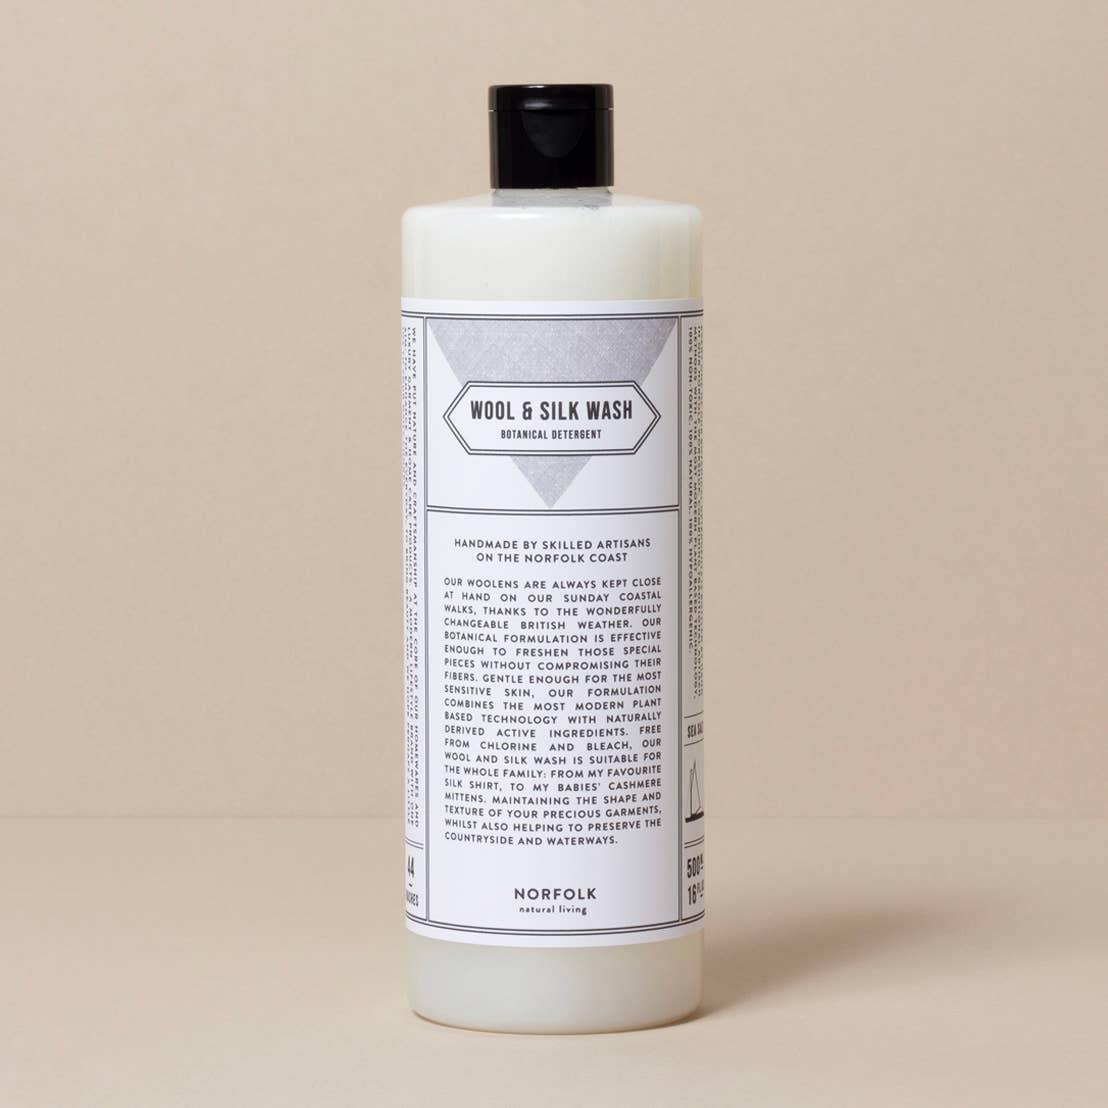 A white bottle of Norfolk Natural Living Coastal Wool and Silk Detergent with a black cap on a beige background. The label, featuring gentle formulation details, provides extensive product and usage information.